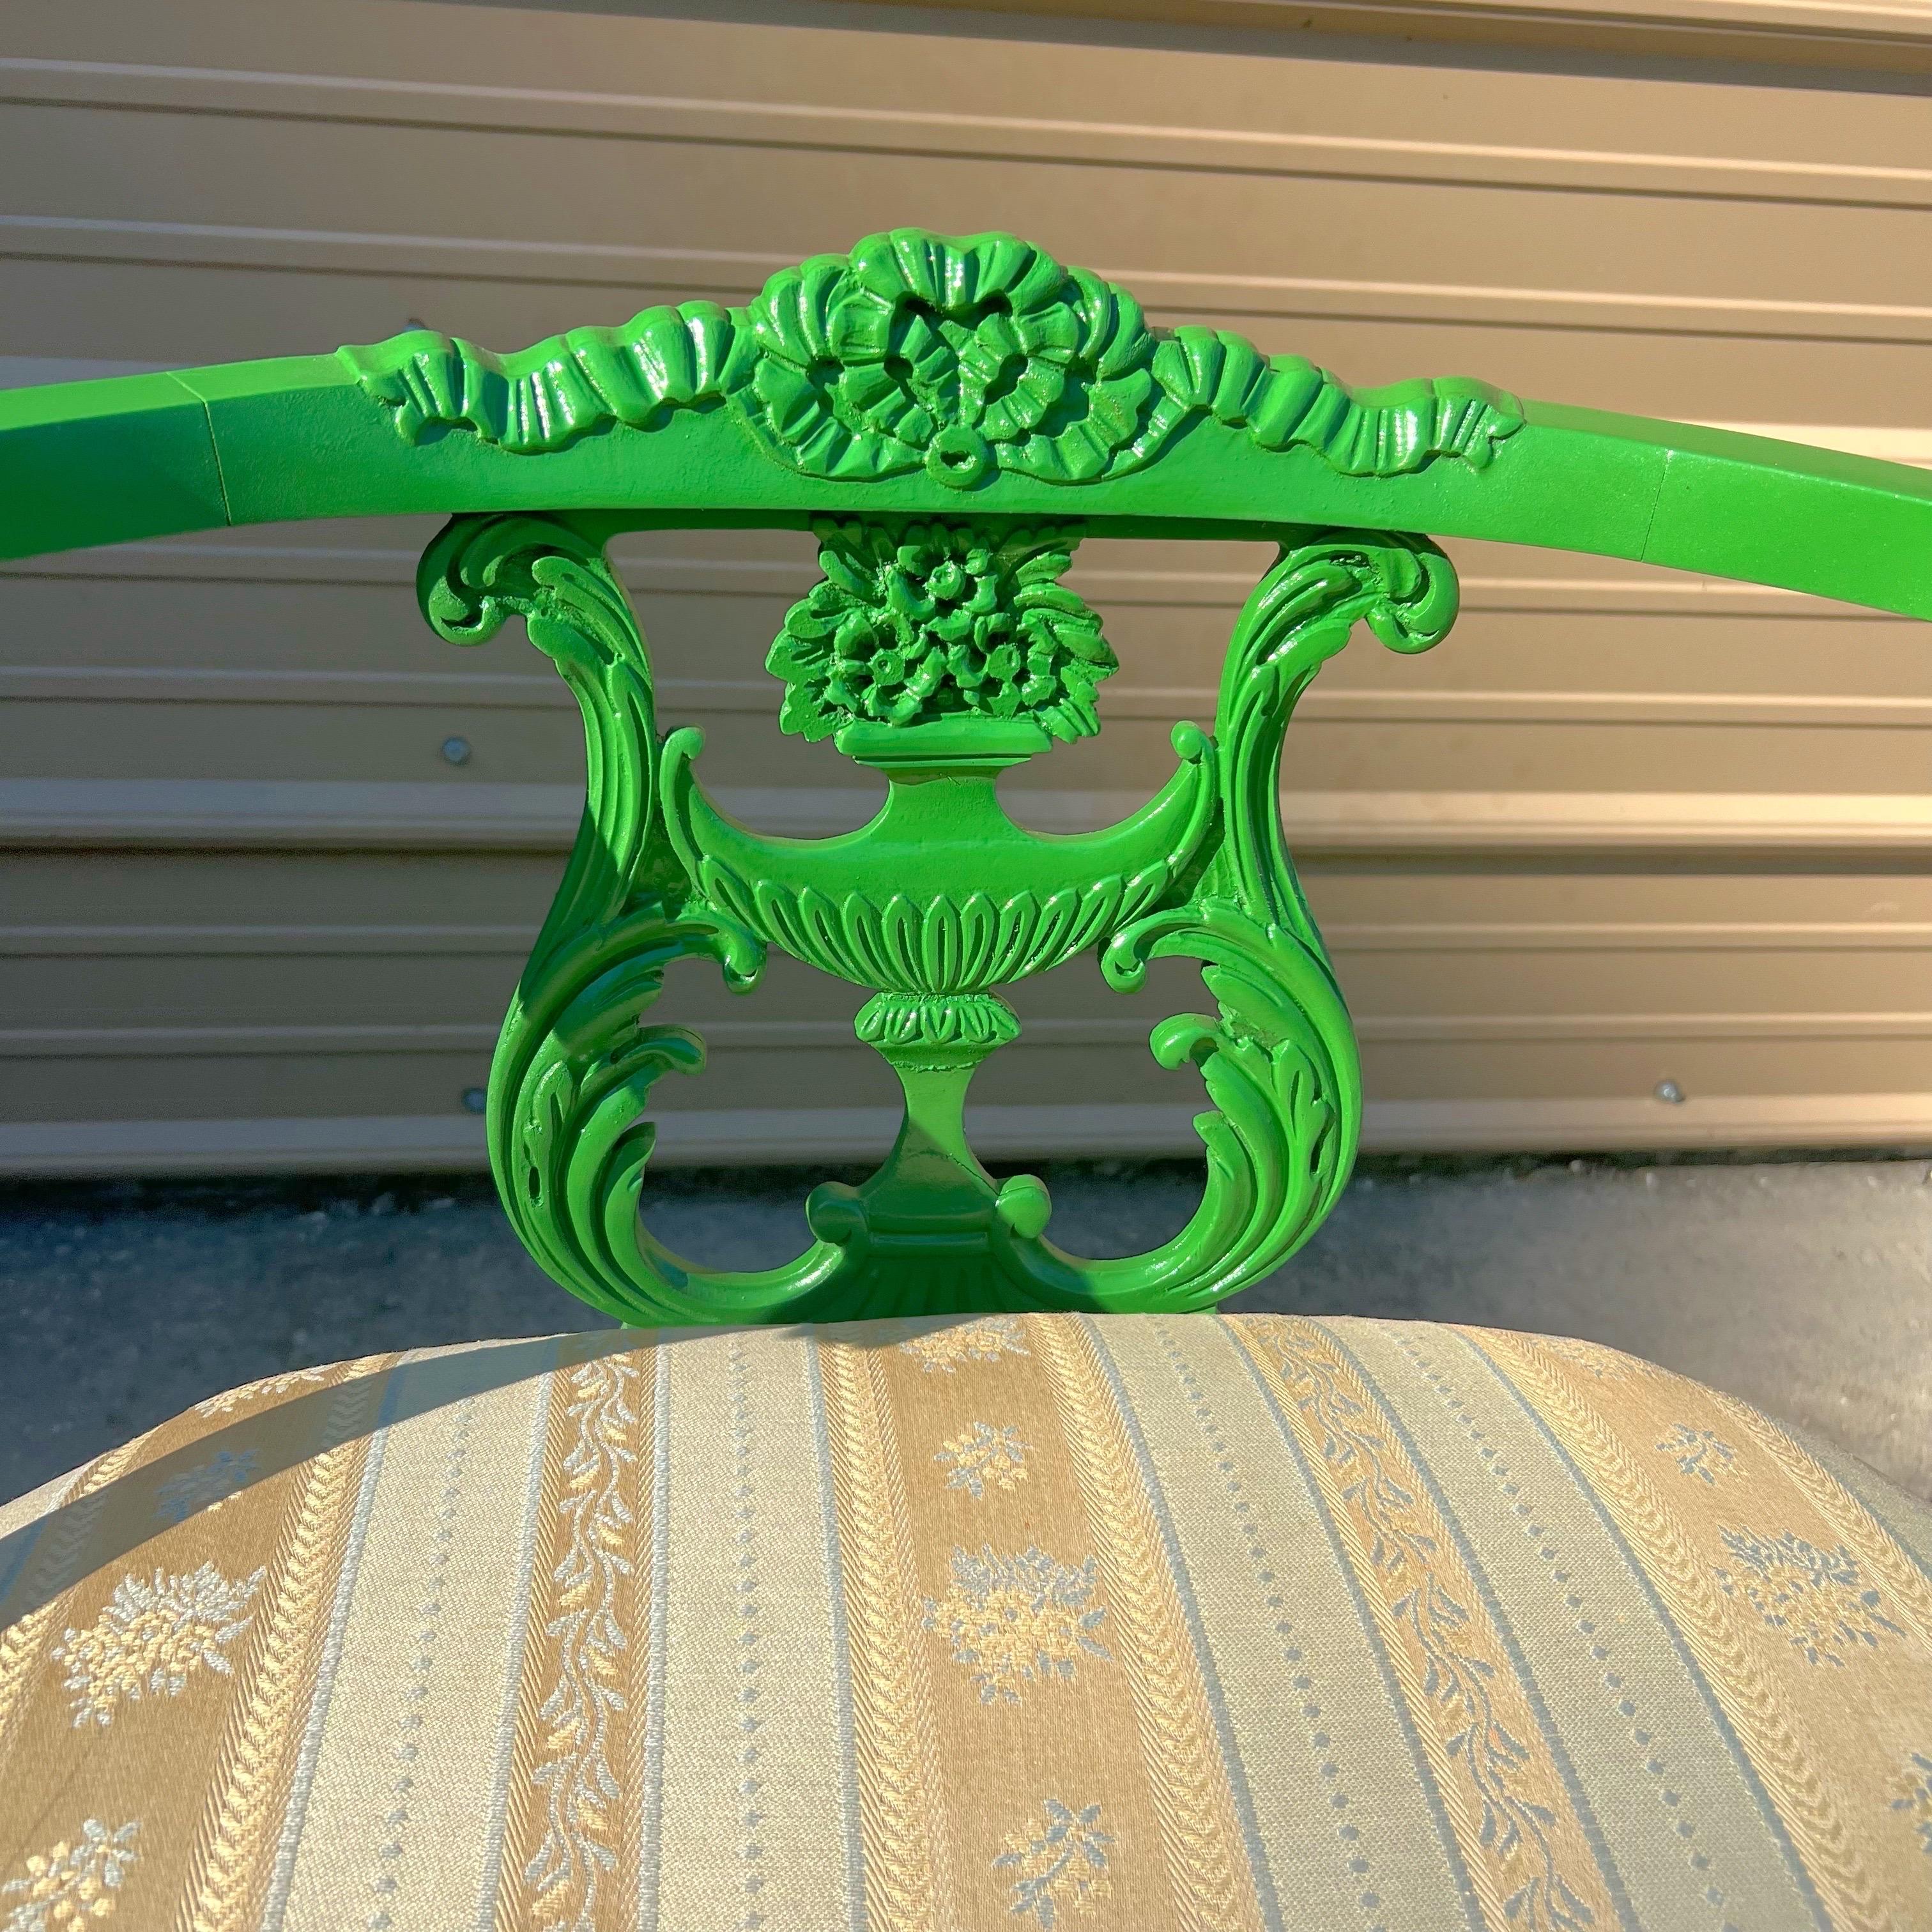 1930’s French Rococo Louis XV Style Lacquered Green Vanity Stool A beautiful 1930’s vanity stool that has been lacquered in “Danish Lawn” by Farrow and Ball.  The finish is a gloss to highlight the intricate wood carving details on this piece.  This